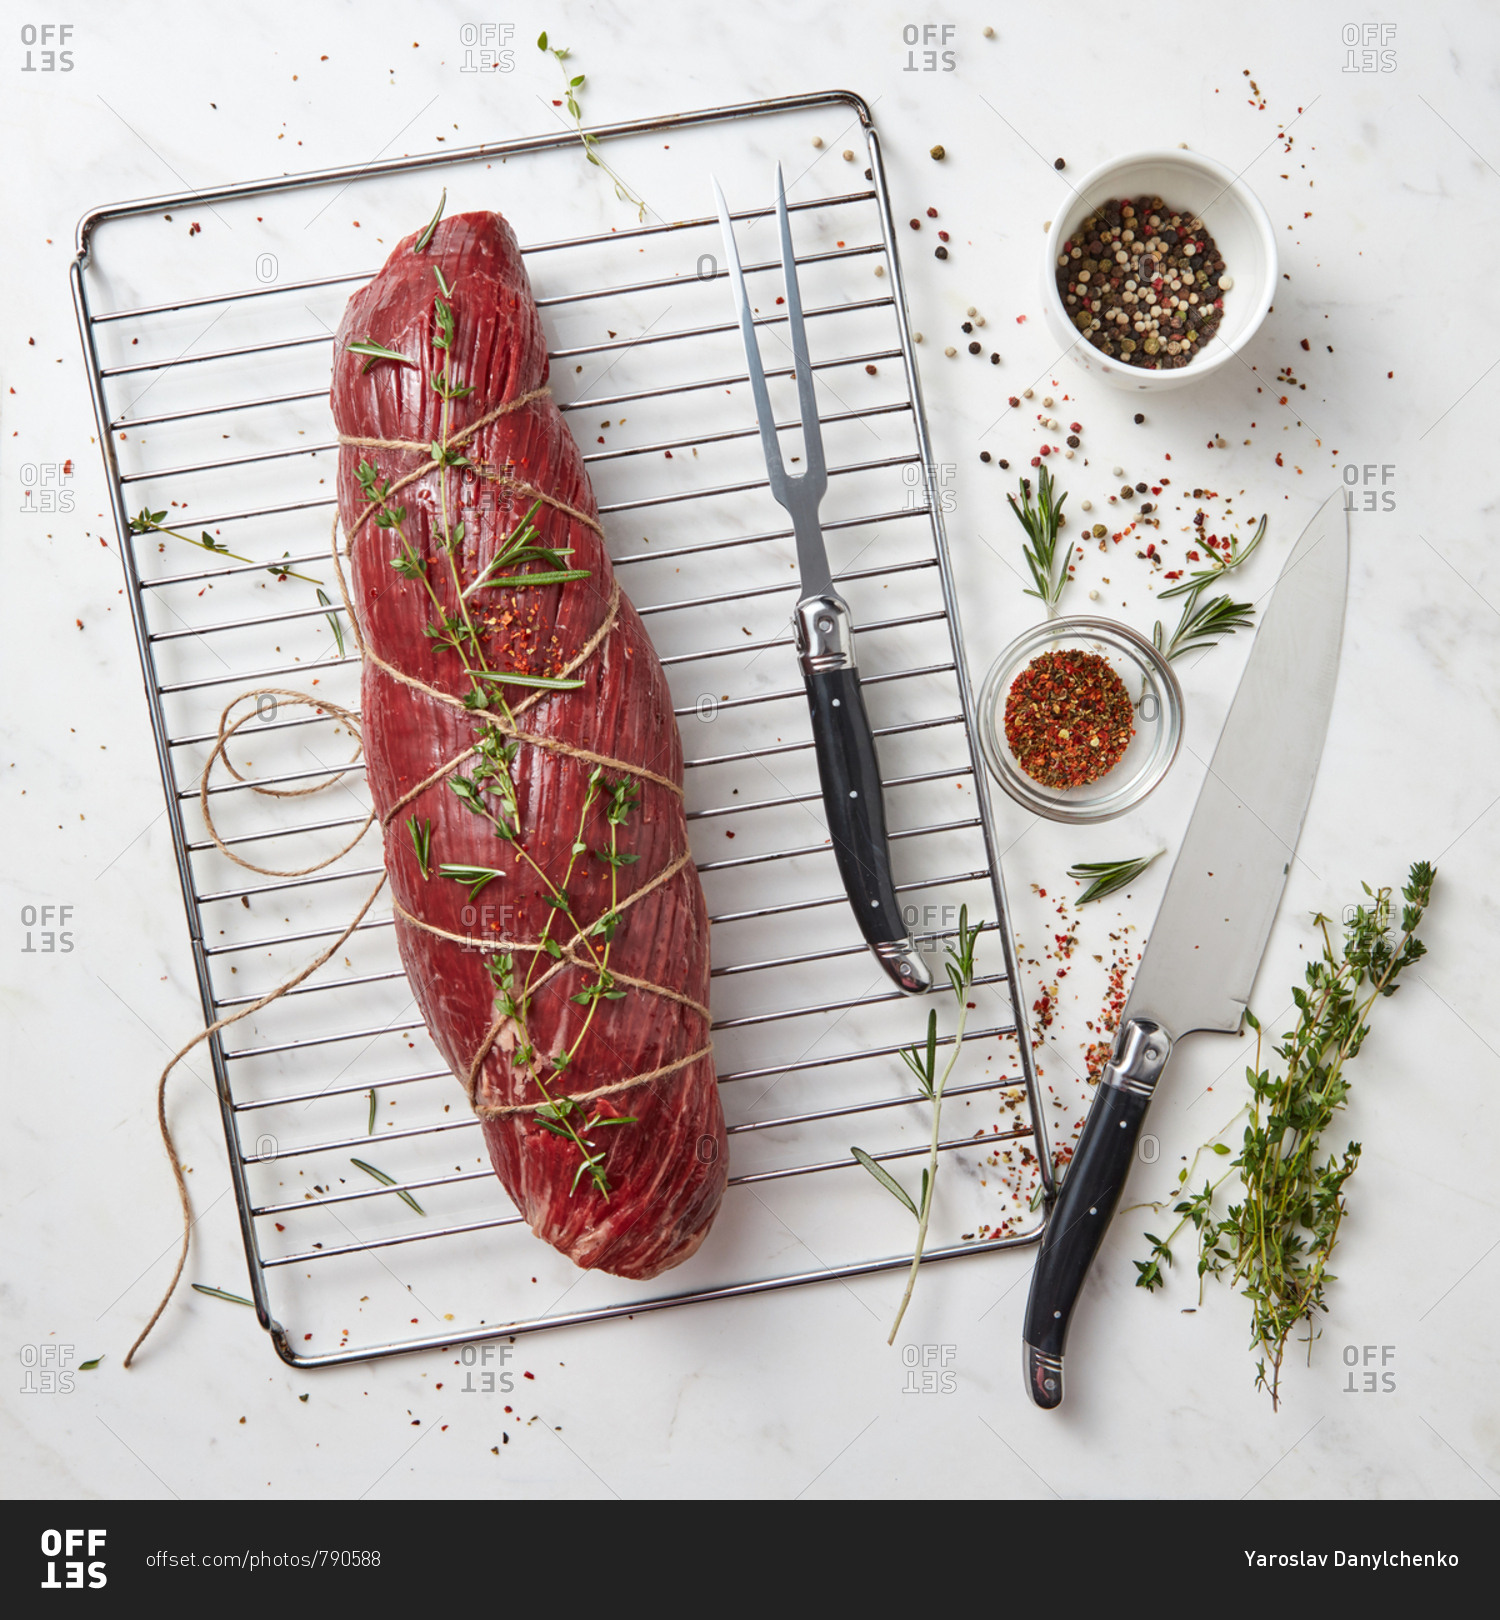 Fresh raw meat, whole piece of fillet with herbs and spices on a stone white background. Cooking ingredients for healthy organic meals. Top view.